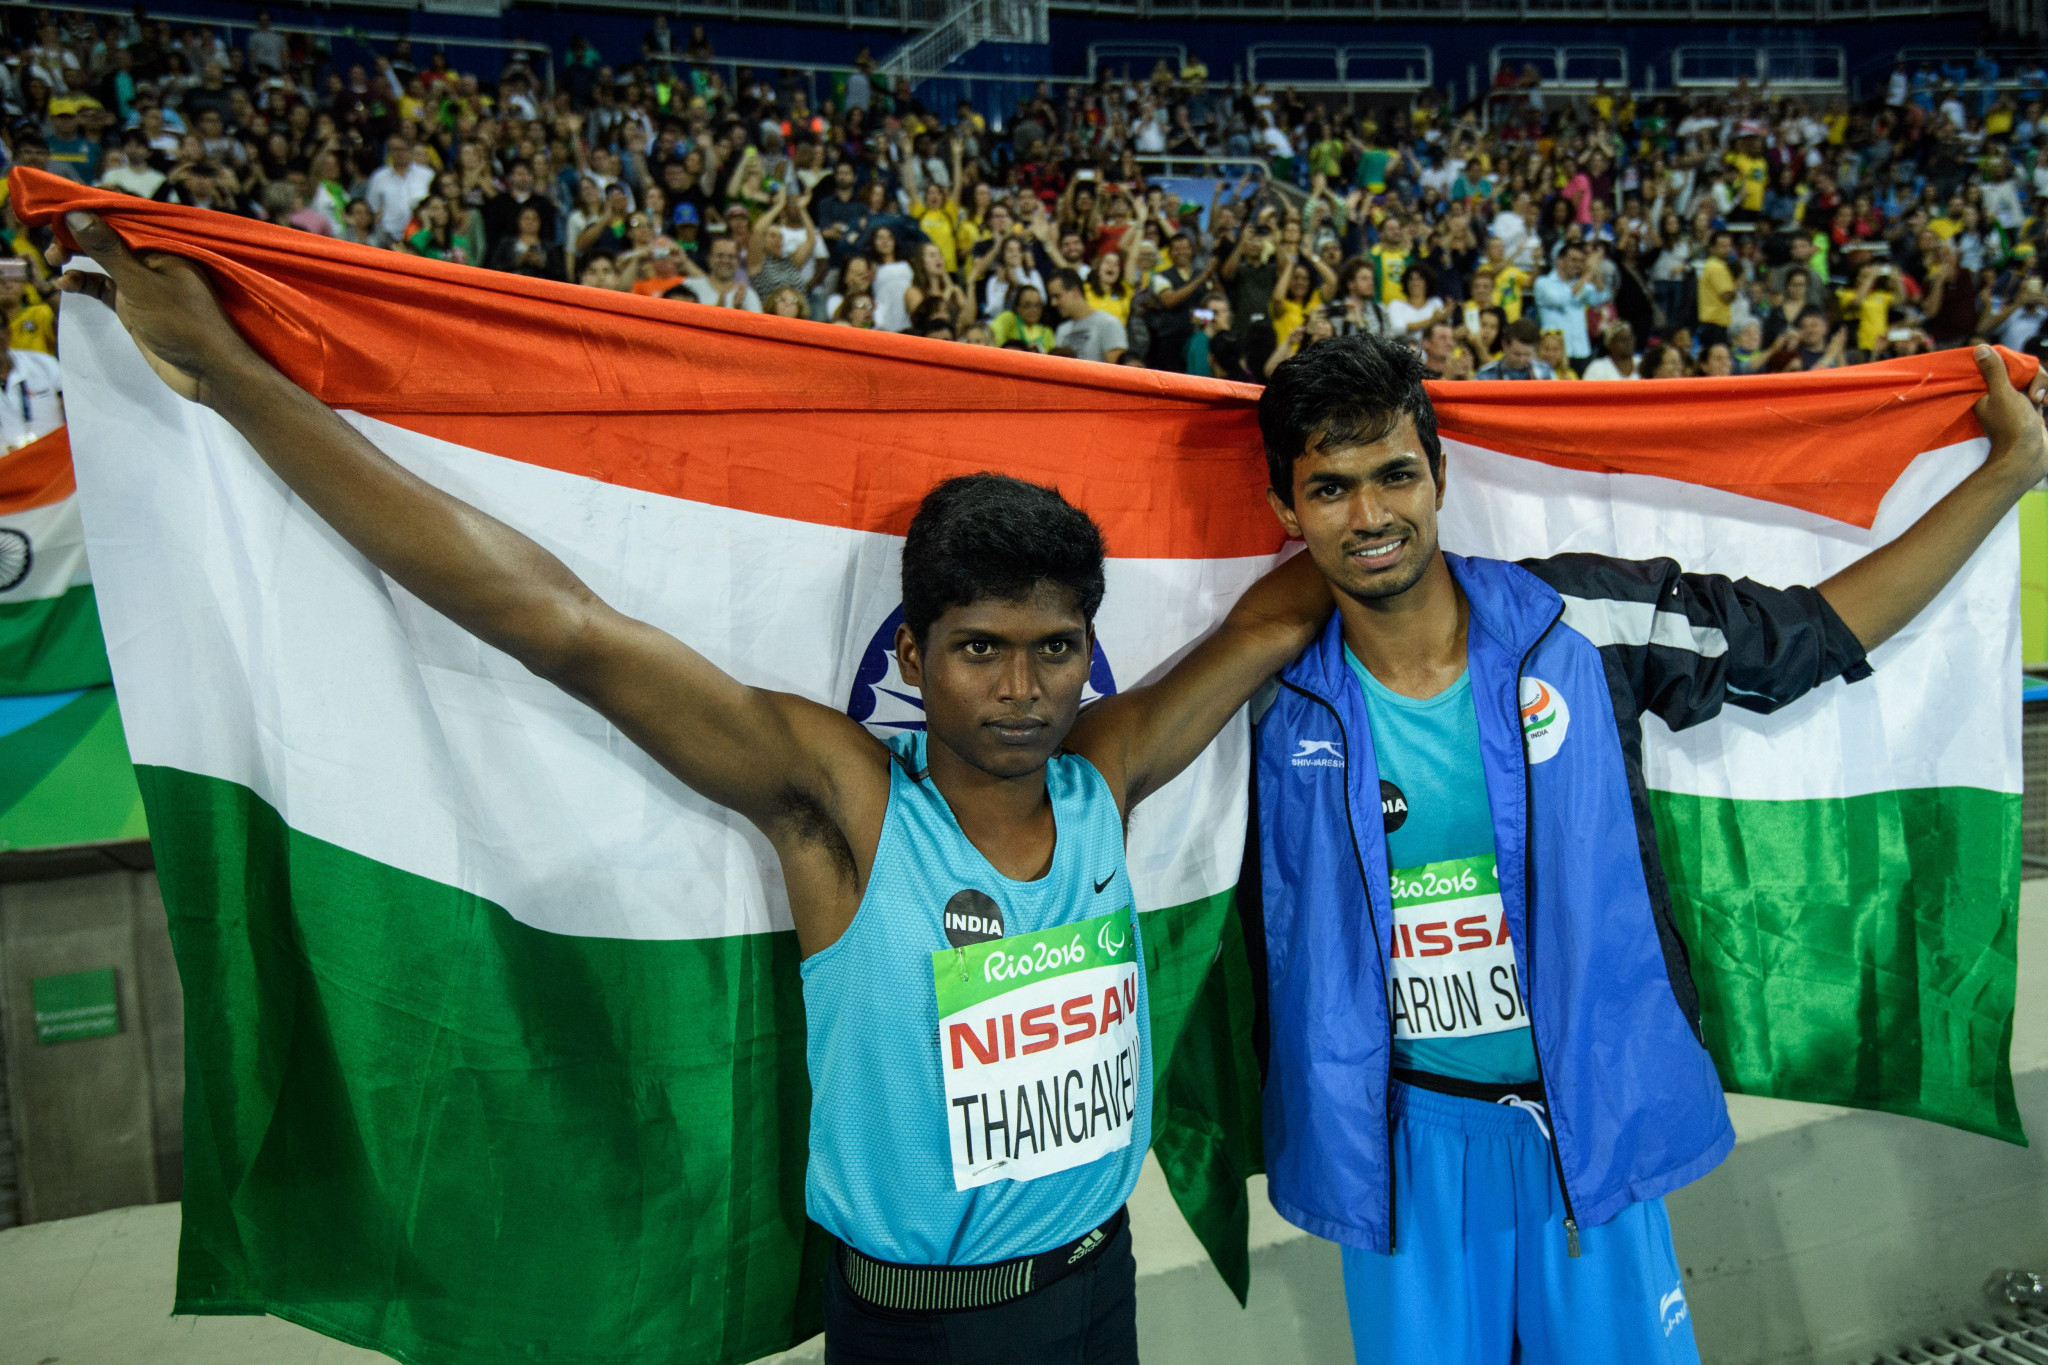 Mariyappan Thangavelu, left, and Bhati Varun Singh captured gold and bronze respectively in the men’s high jump T42 at Rio 2016 ©Getty Images